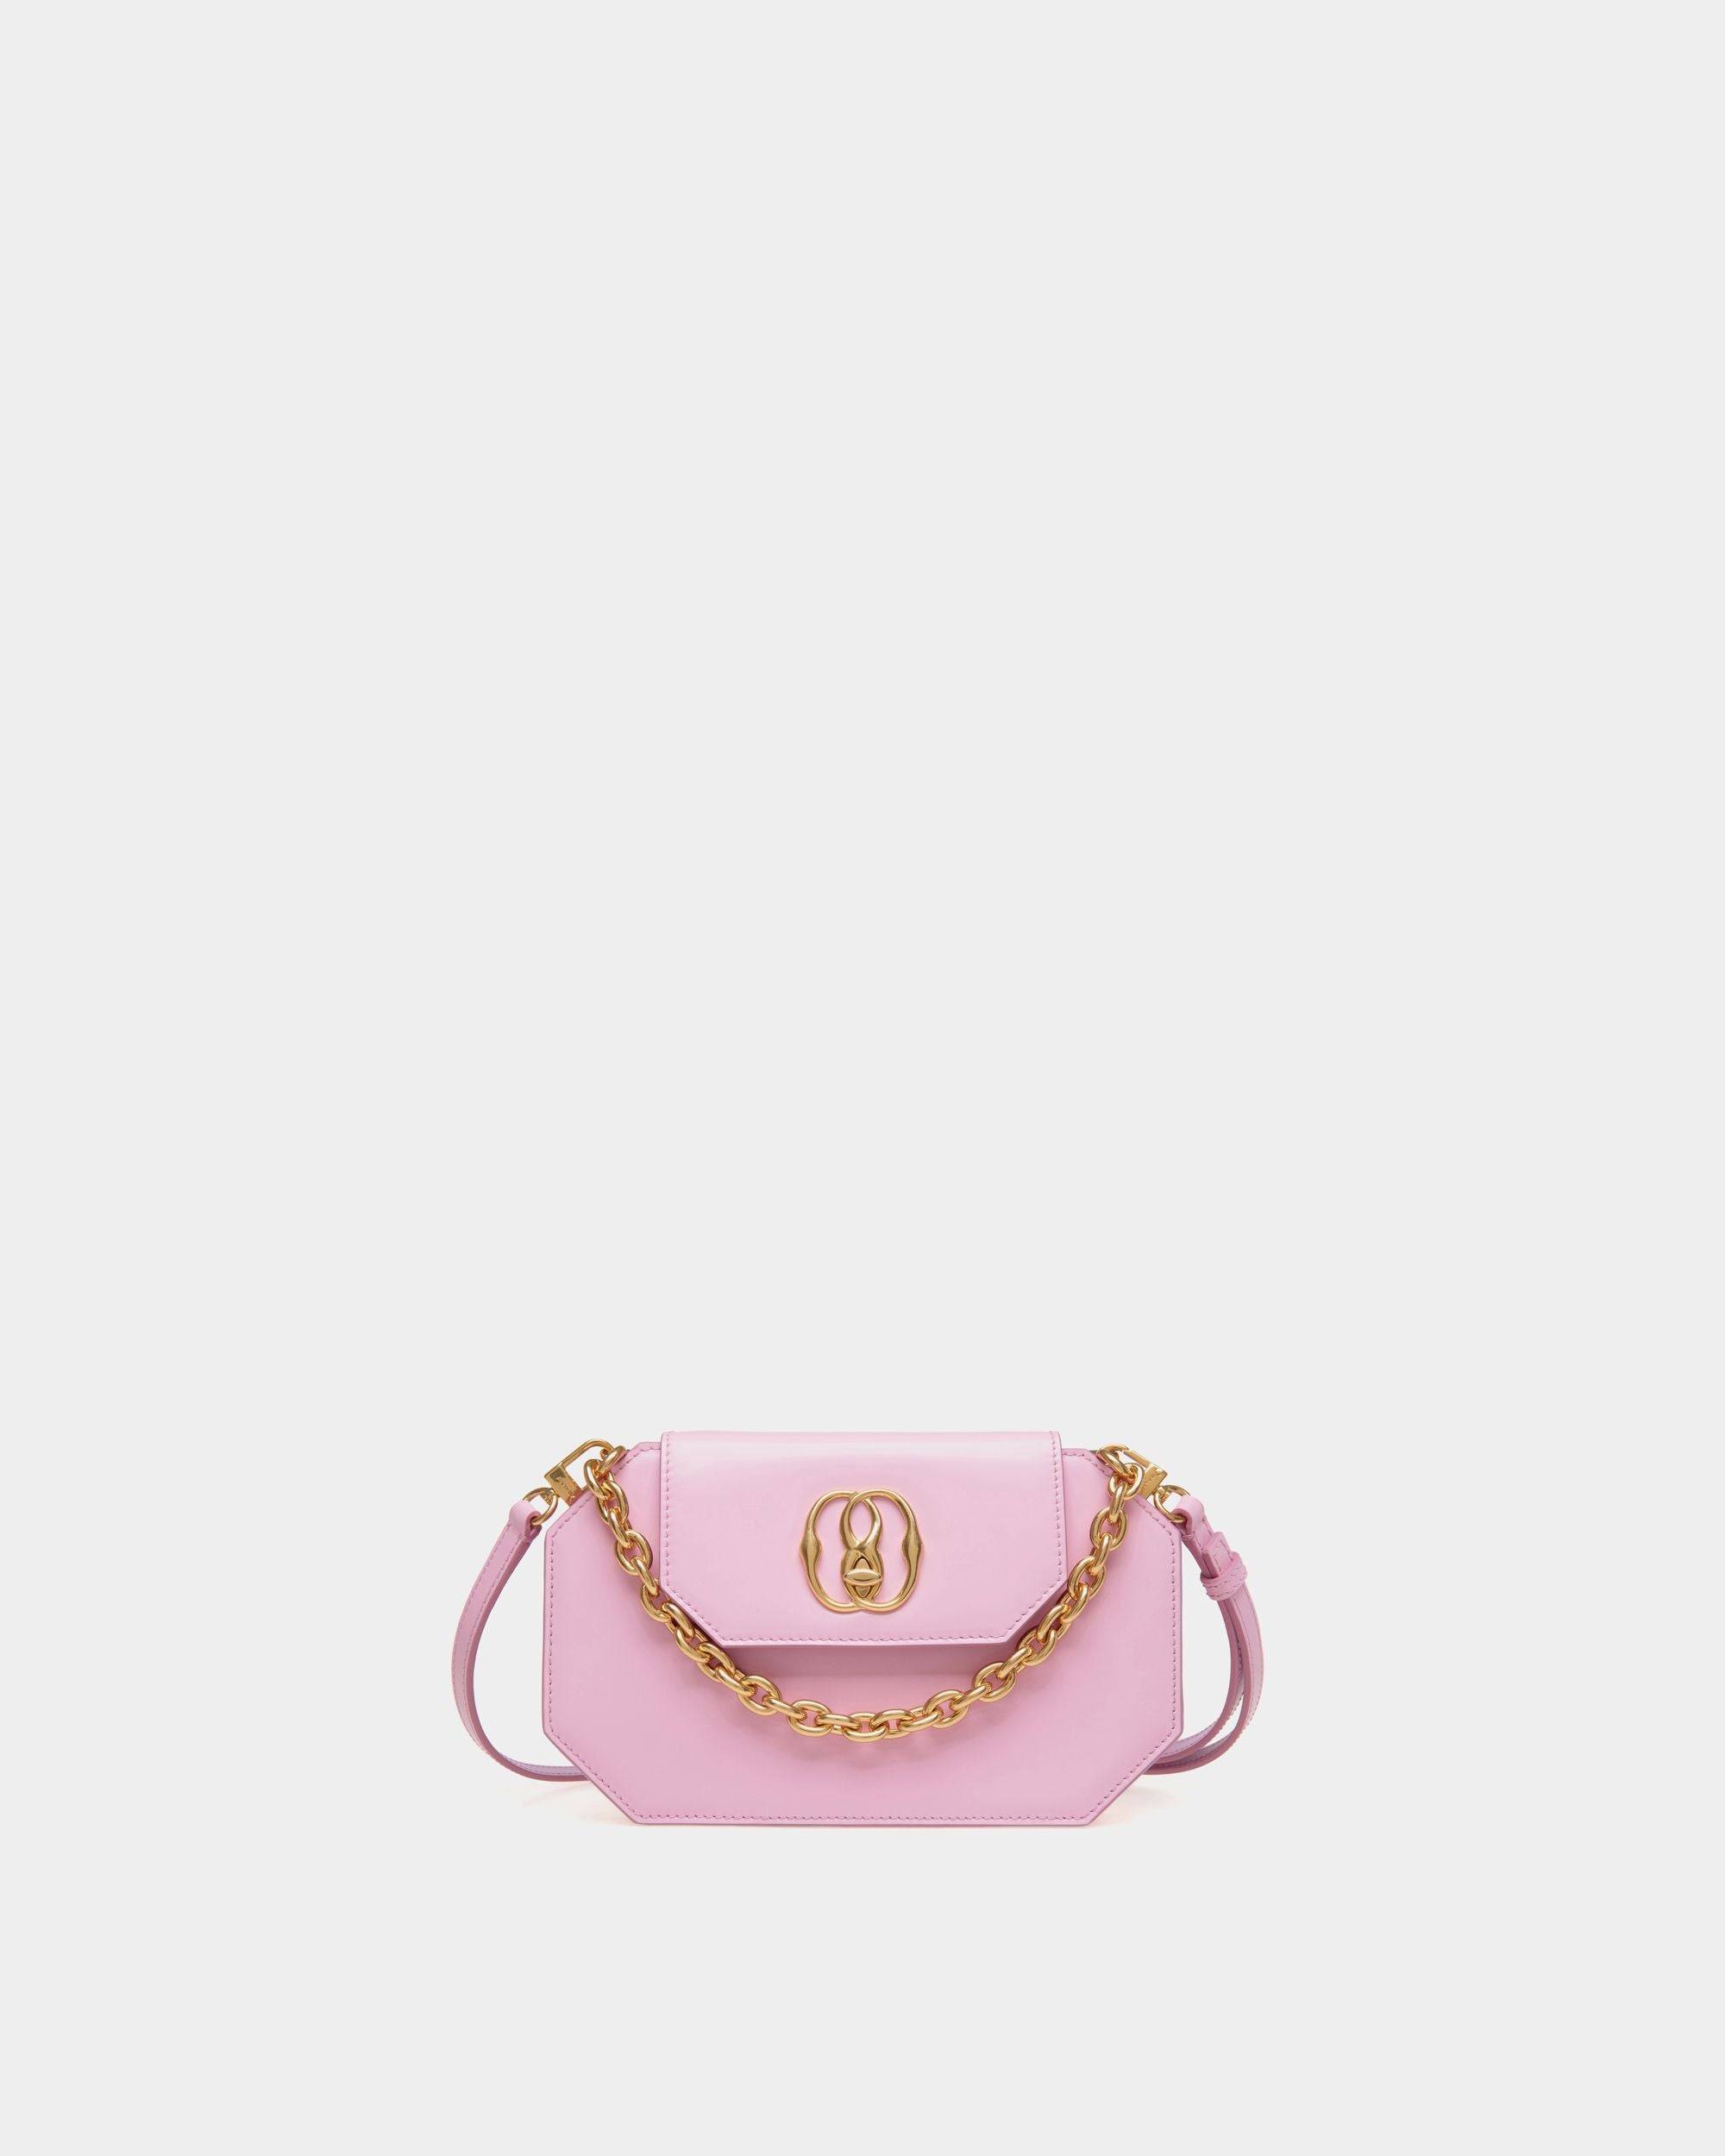 Emblem | Women's Mini Bag in Pink Brushed Leather | Bally | Still Life Front